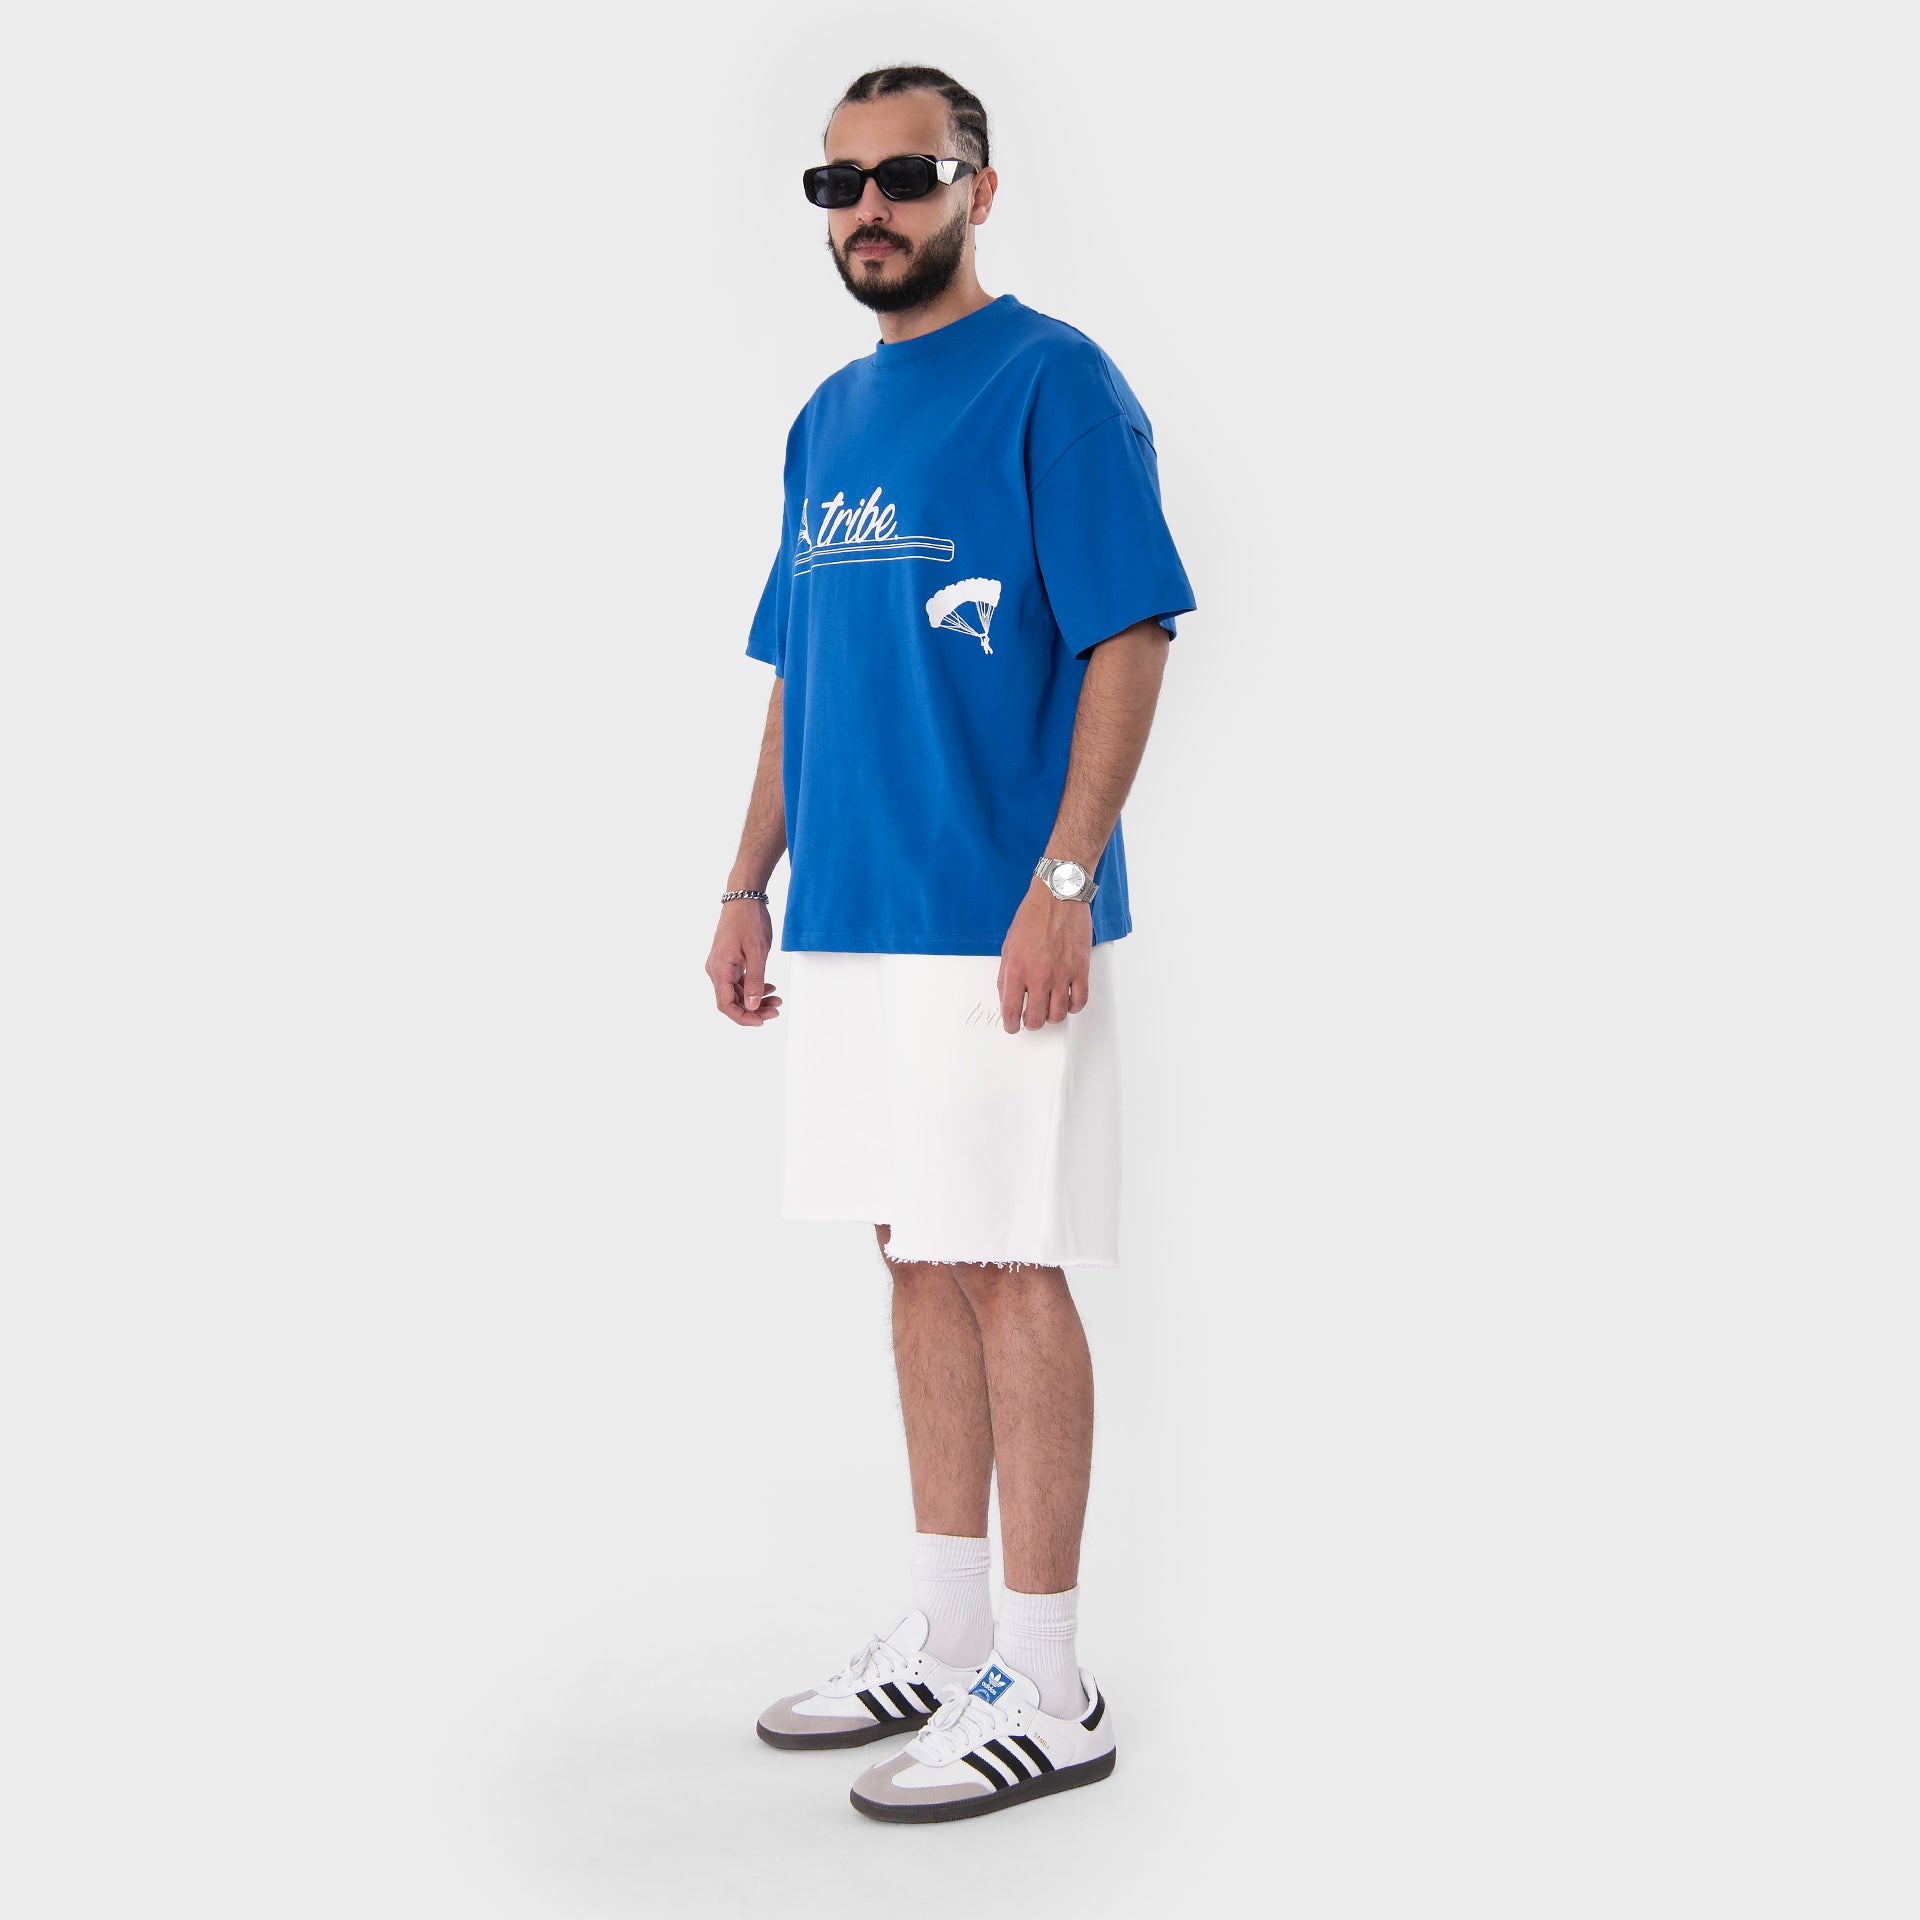 Blue Parachute T-shirt From Tribe